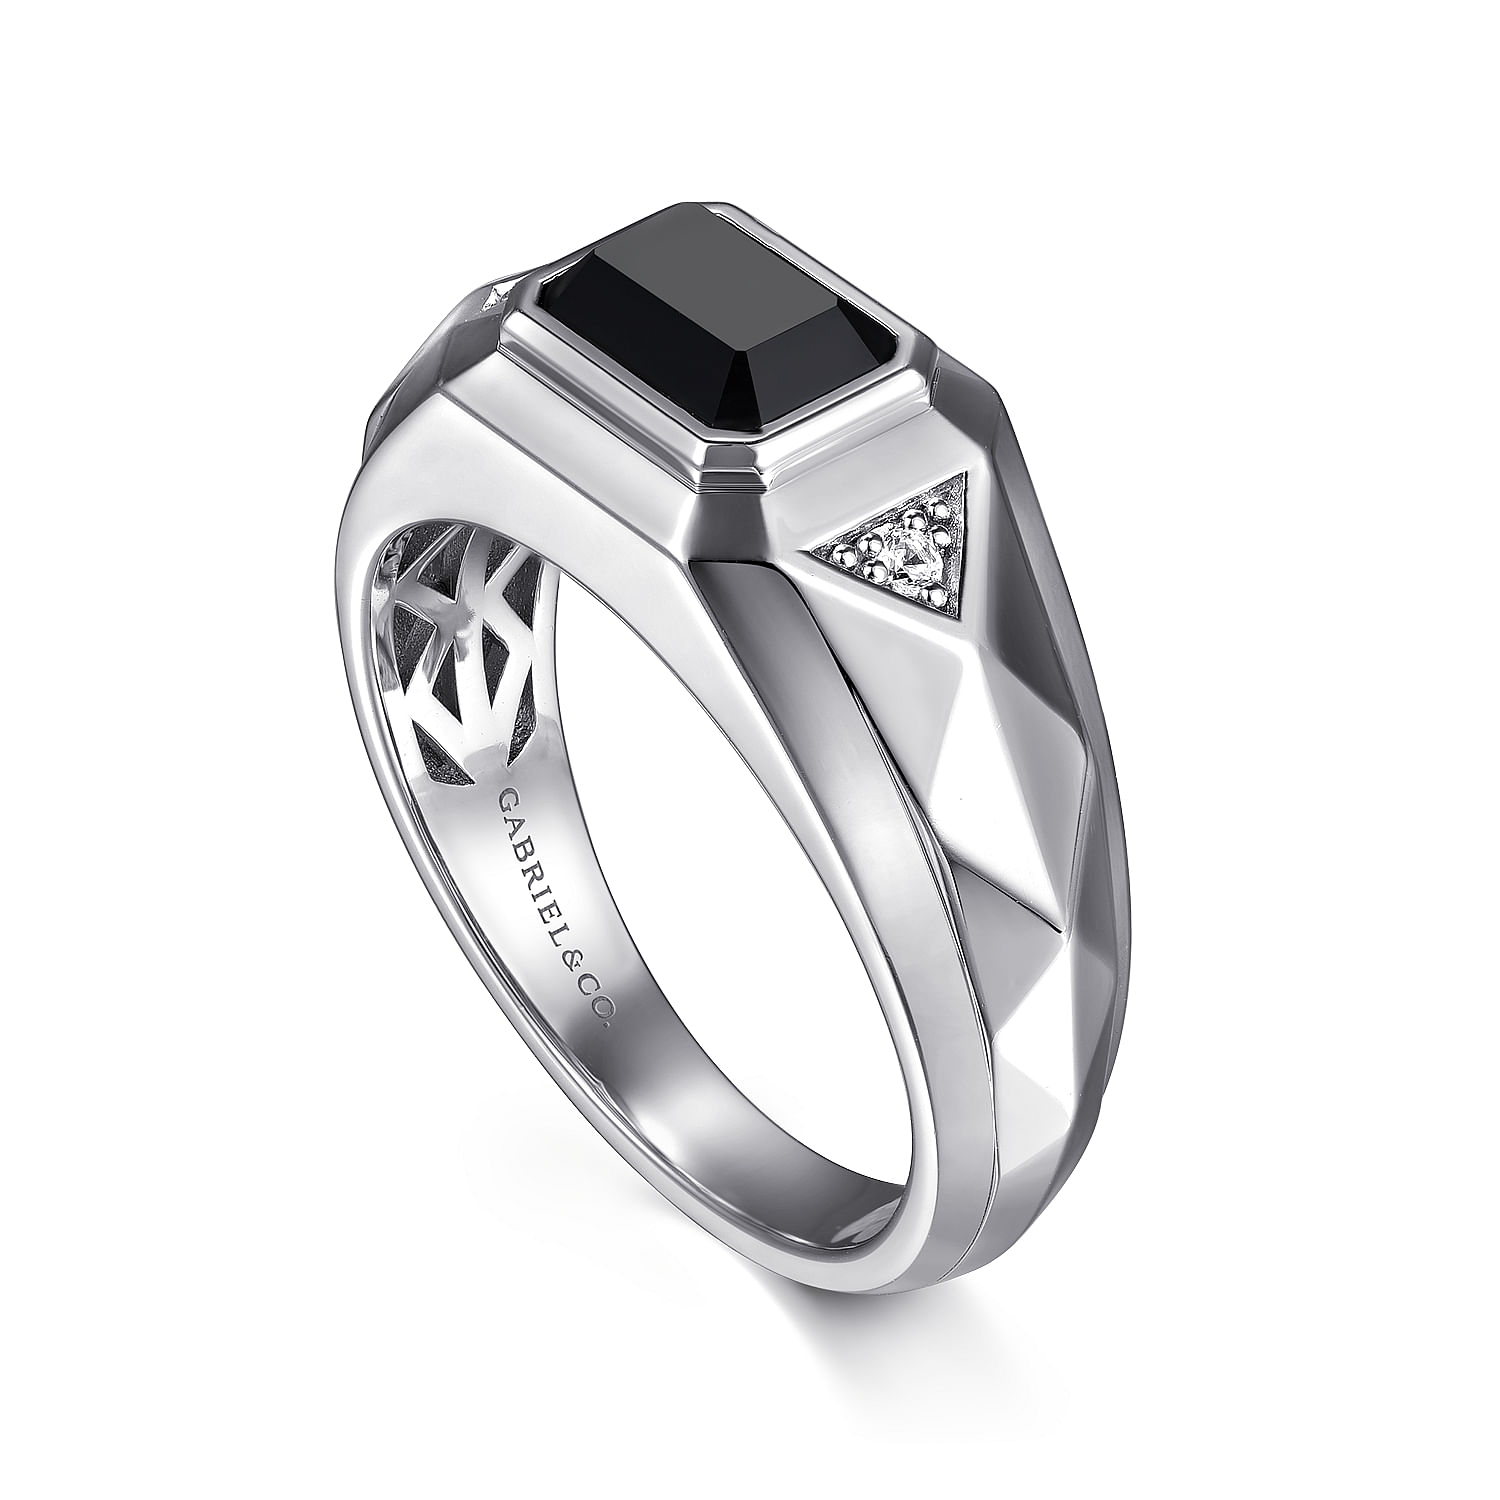 Wide 925 Sterling Silver Faceted Mens Ring with Onyx in High Polished Finish